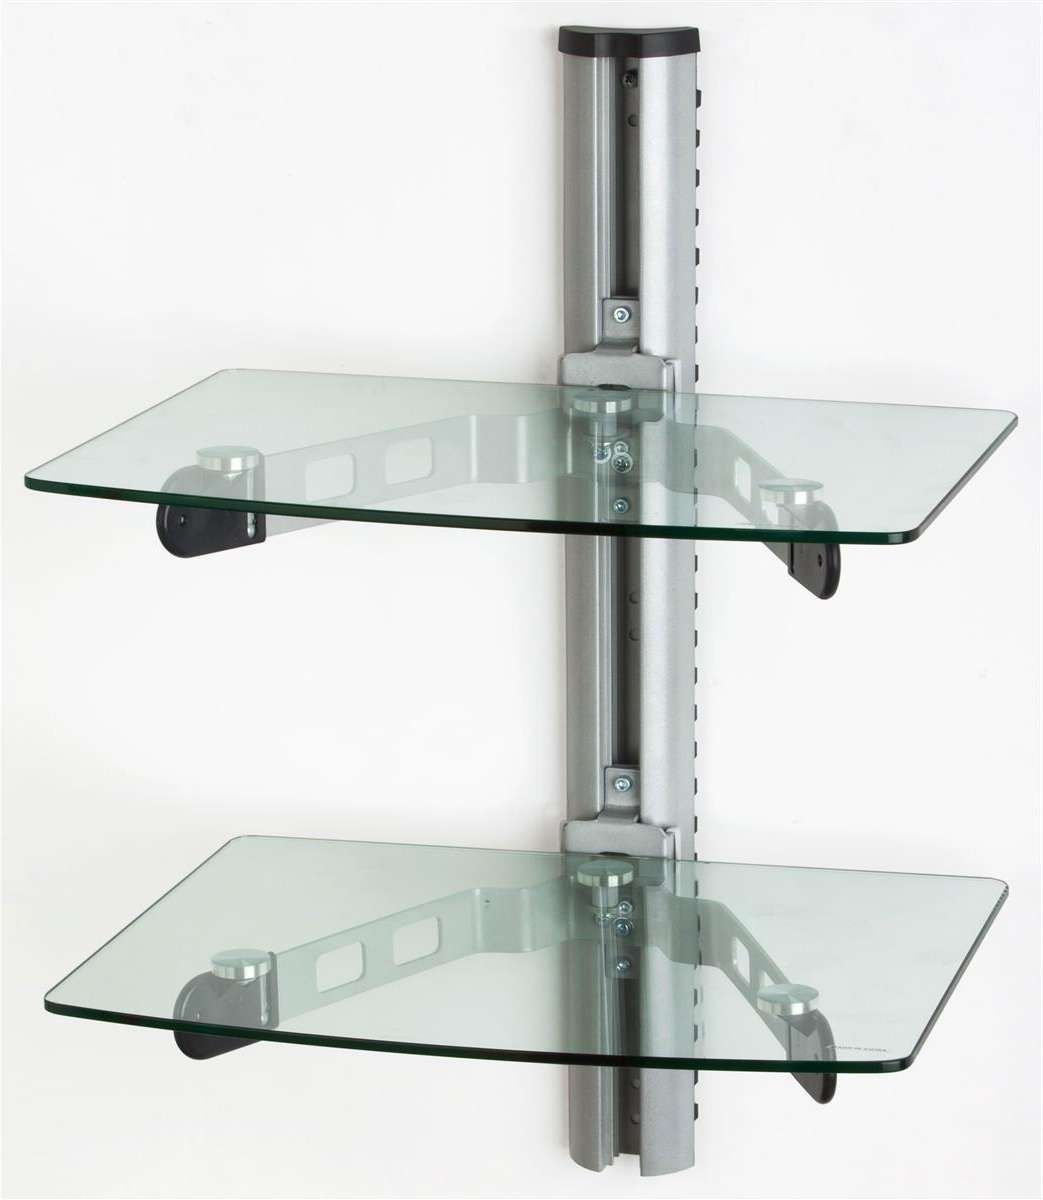 Fresh Decoration Wall Mount Tv Stand With Shelves Pretty Wall For Wall Mounted Tv Stands With Shelves (View 15 of 15)